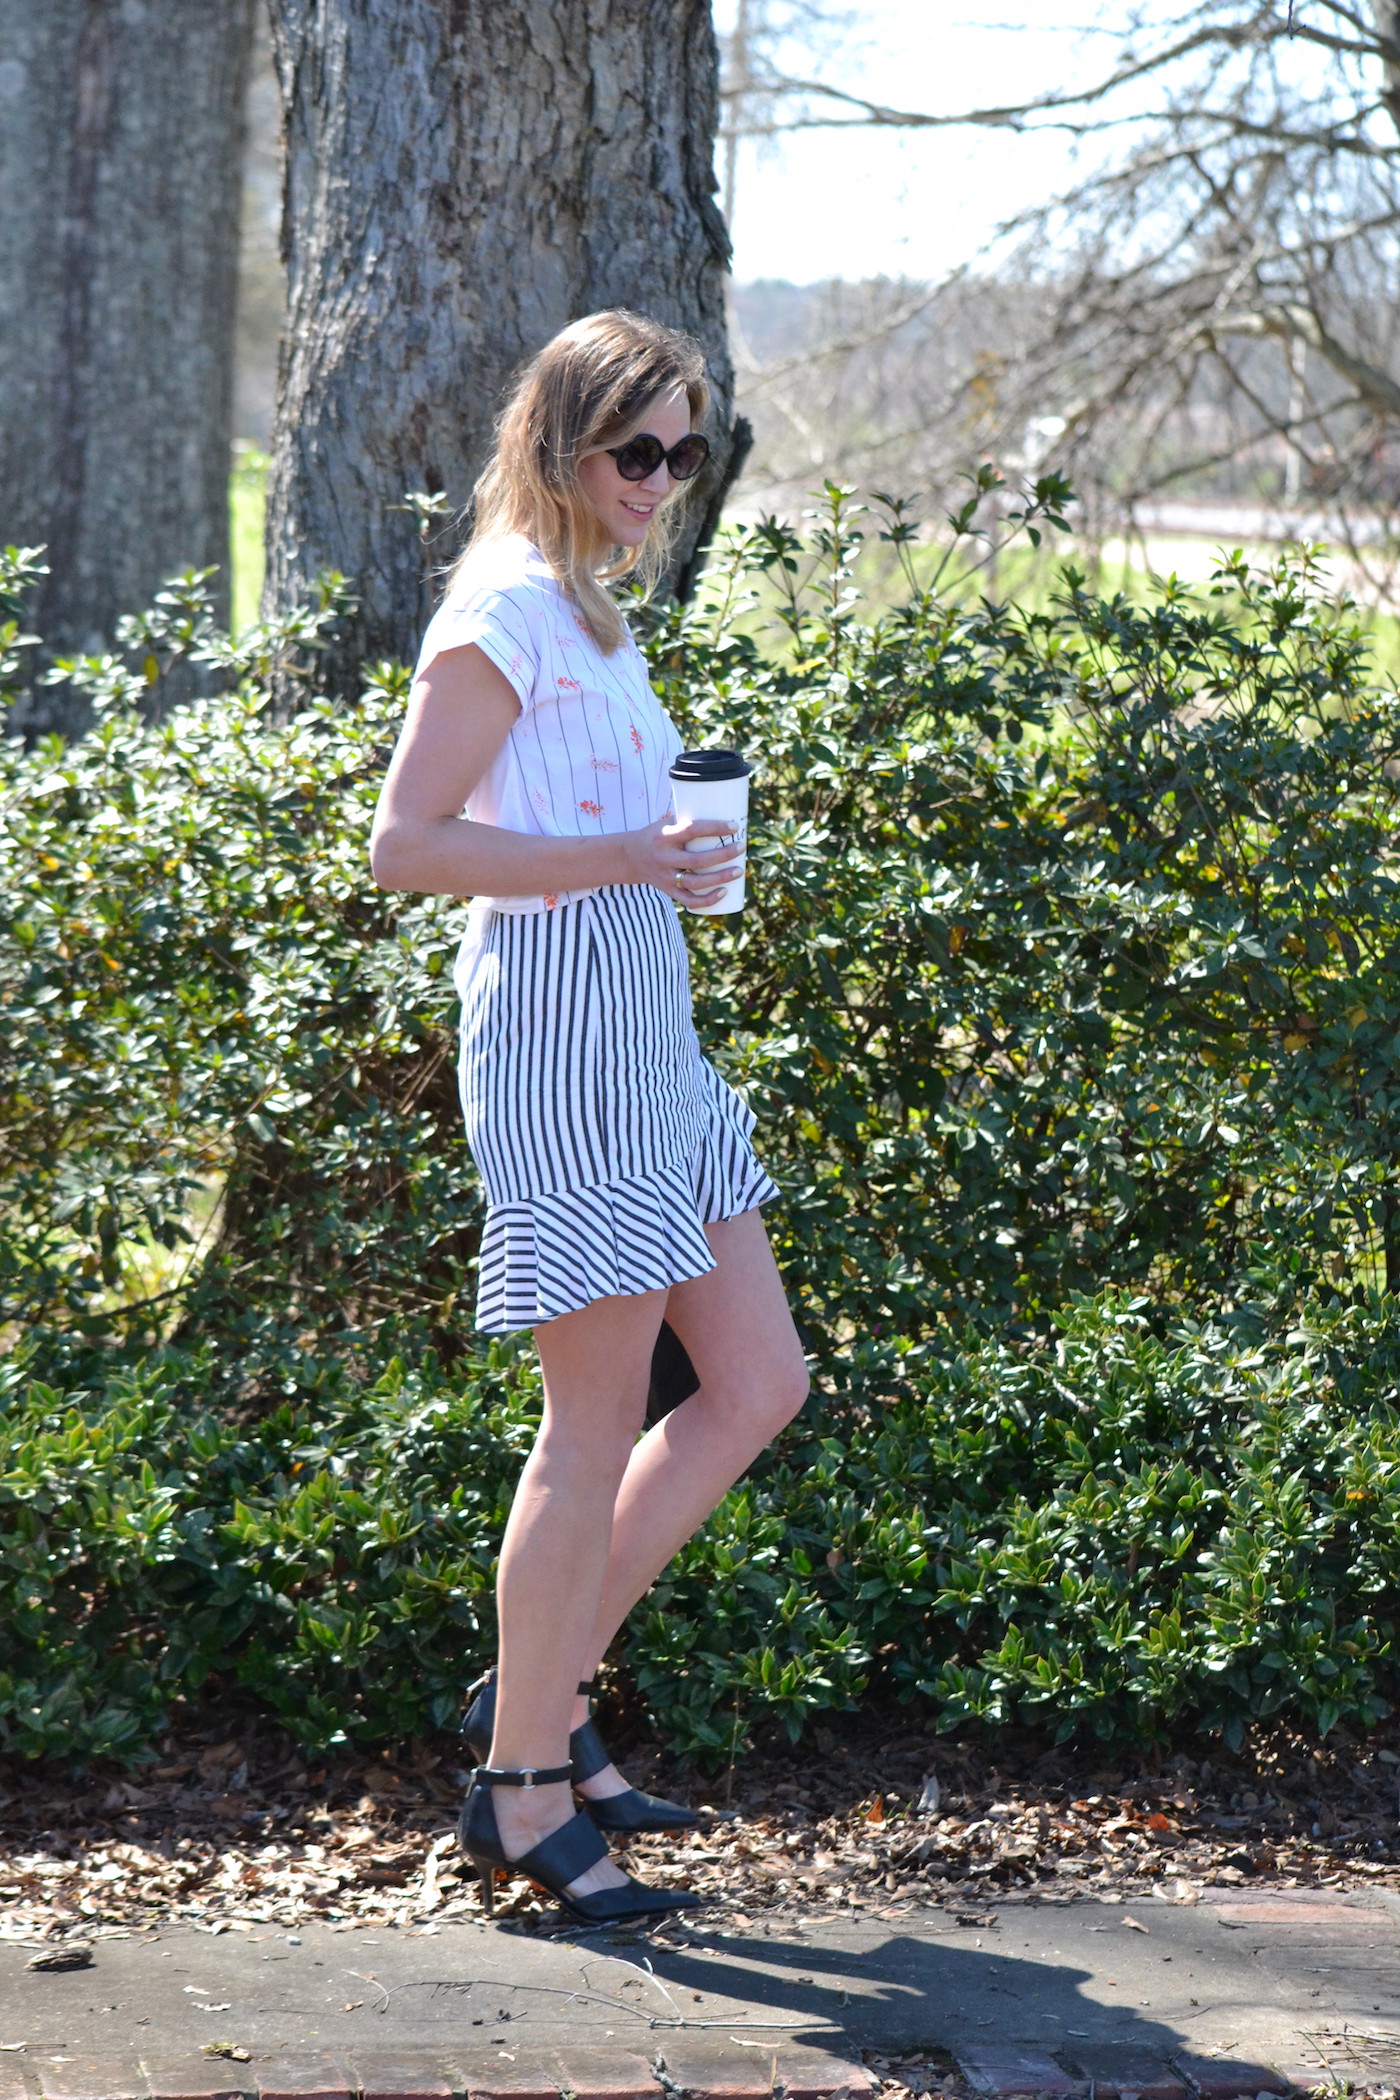 A New Day at Target // Striped Ruffle Skirt and Striped Floral Top // www.thehiveblog.com